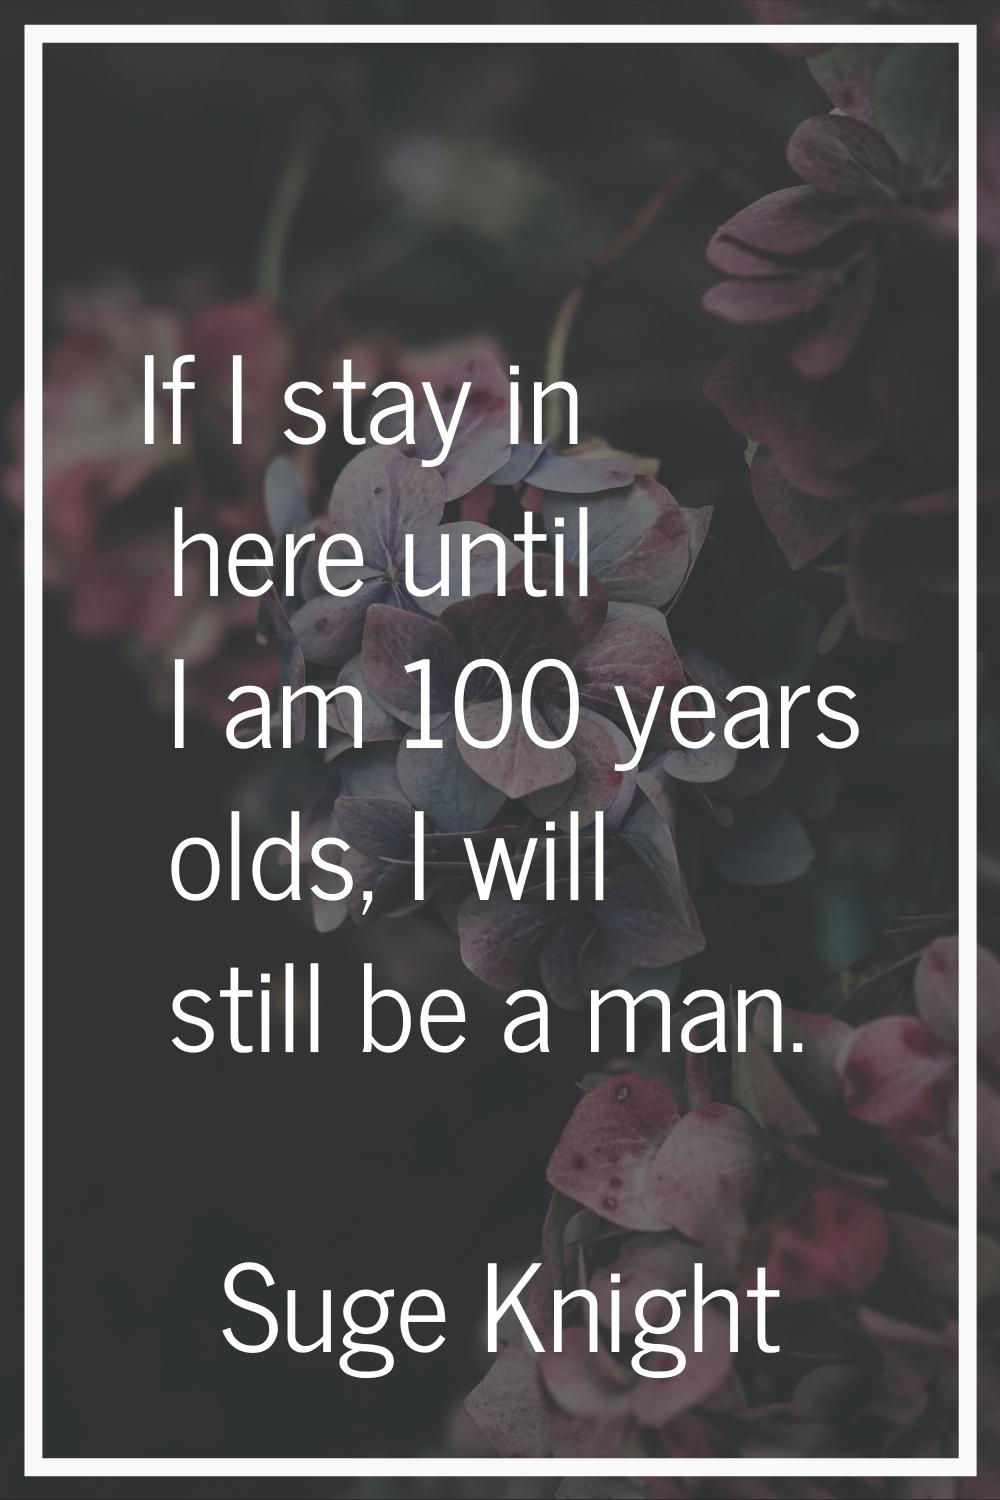 If I stay in here until I am 100 years olds, I will still be a man.